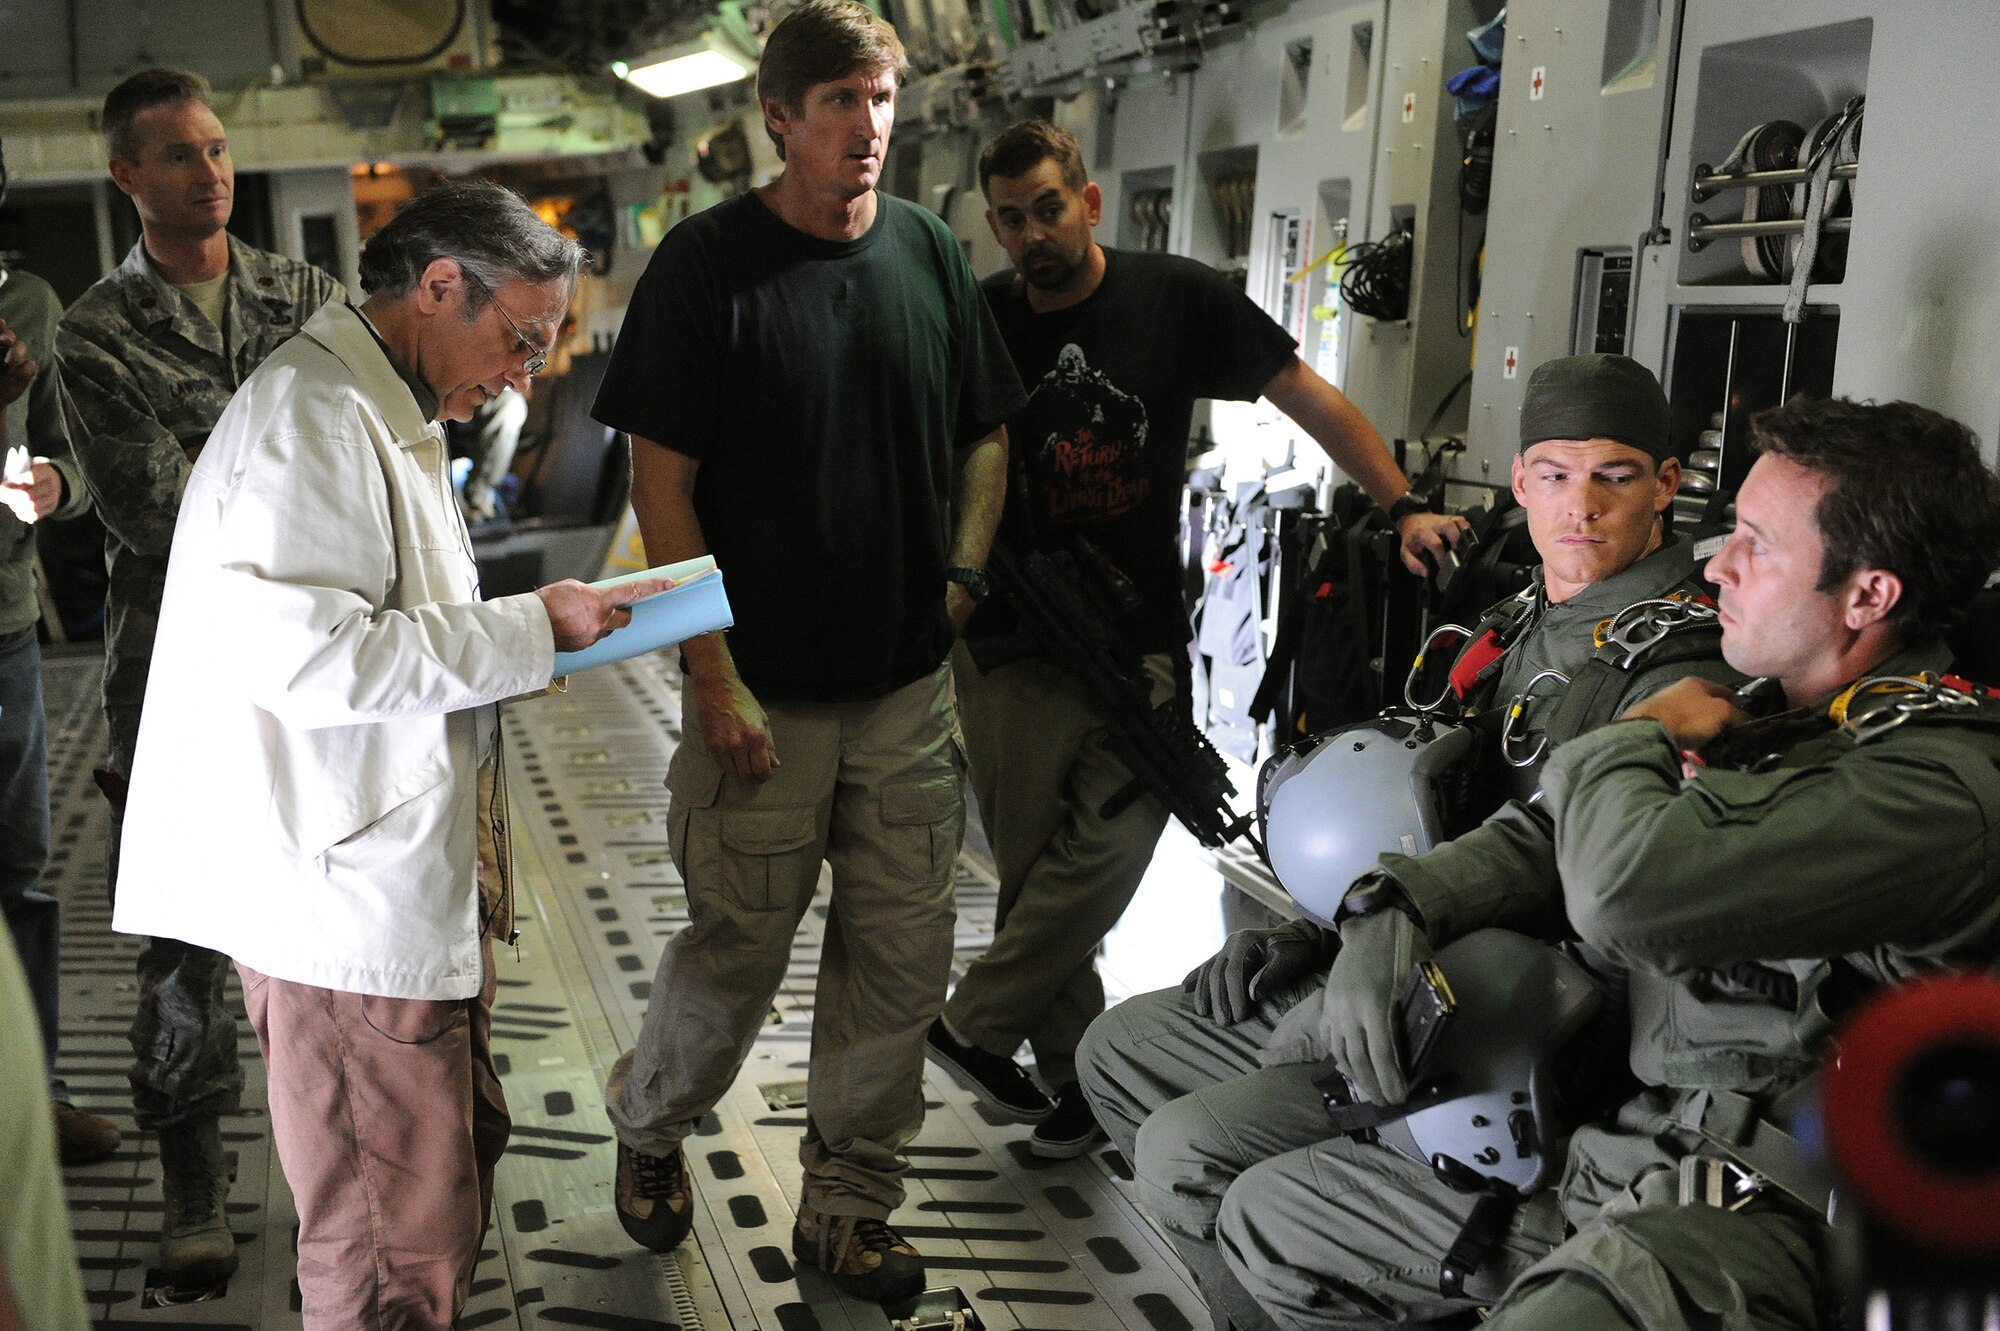 Production crew members and actors Alan Ritchson (right) and Alex O’Loughlin (far right) and from the goes over the script during a scene from “Hawaii Five-0” being filmed aboard a C-17 Globemaster at Joint Base Pearl Harbor-Hickam, Feb. 21, 2013.  The crew and cast were on scene to shoot a portion of an upcoming episode. (U.S. Air Force photo/Tech. Sgt. Jerome S. Tayborn)